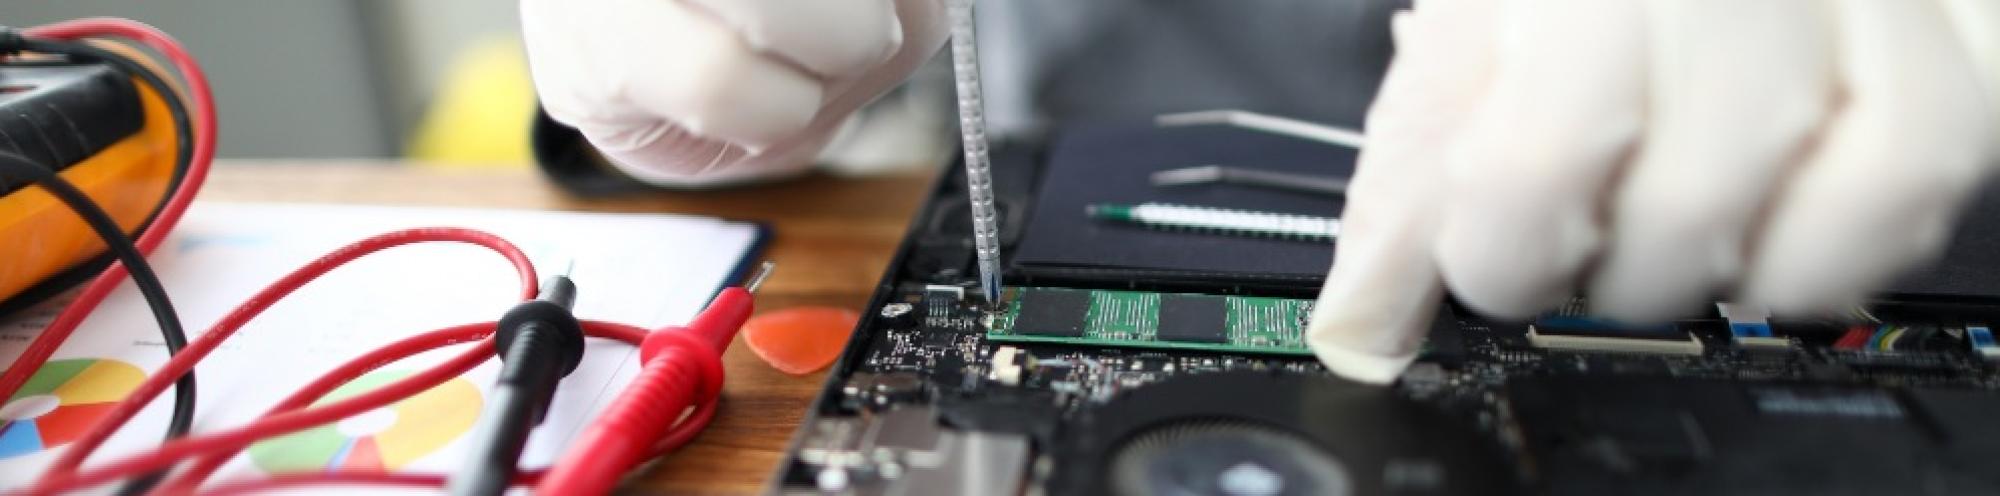 Image of a laptop being fixed